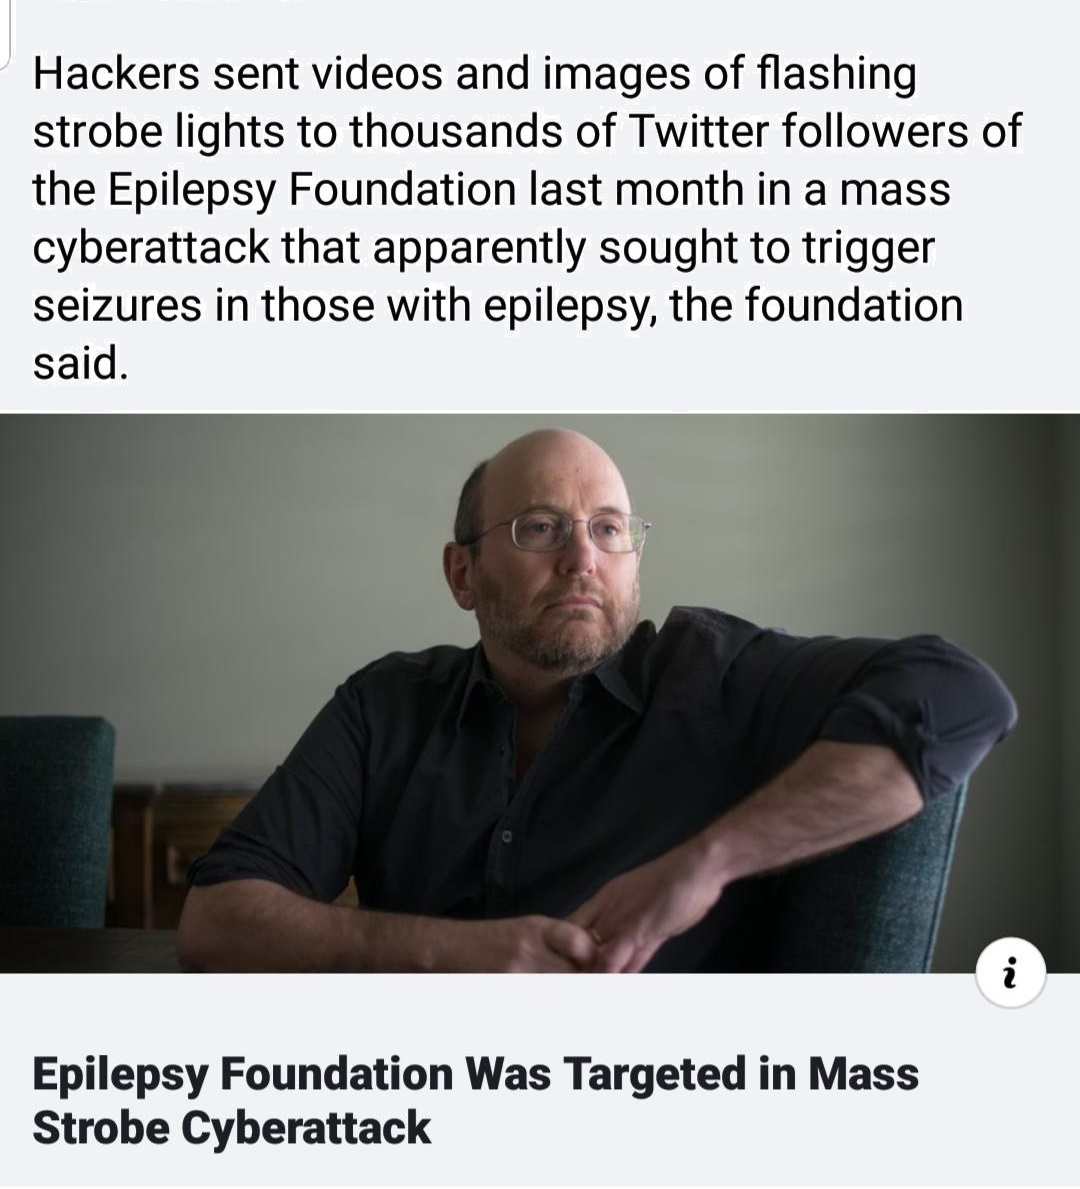 photo caption - Hackers sent videos and images of flashing strobe lights to thousands of Twitter ers of the Epilepsy Foundation last month in a mass cyberattack that apparently sought to trigger seizures in those with epilepsy, the foundation said. Epilep